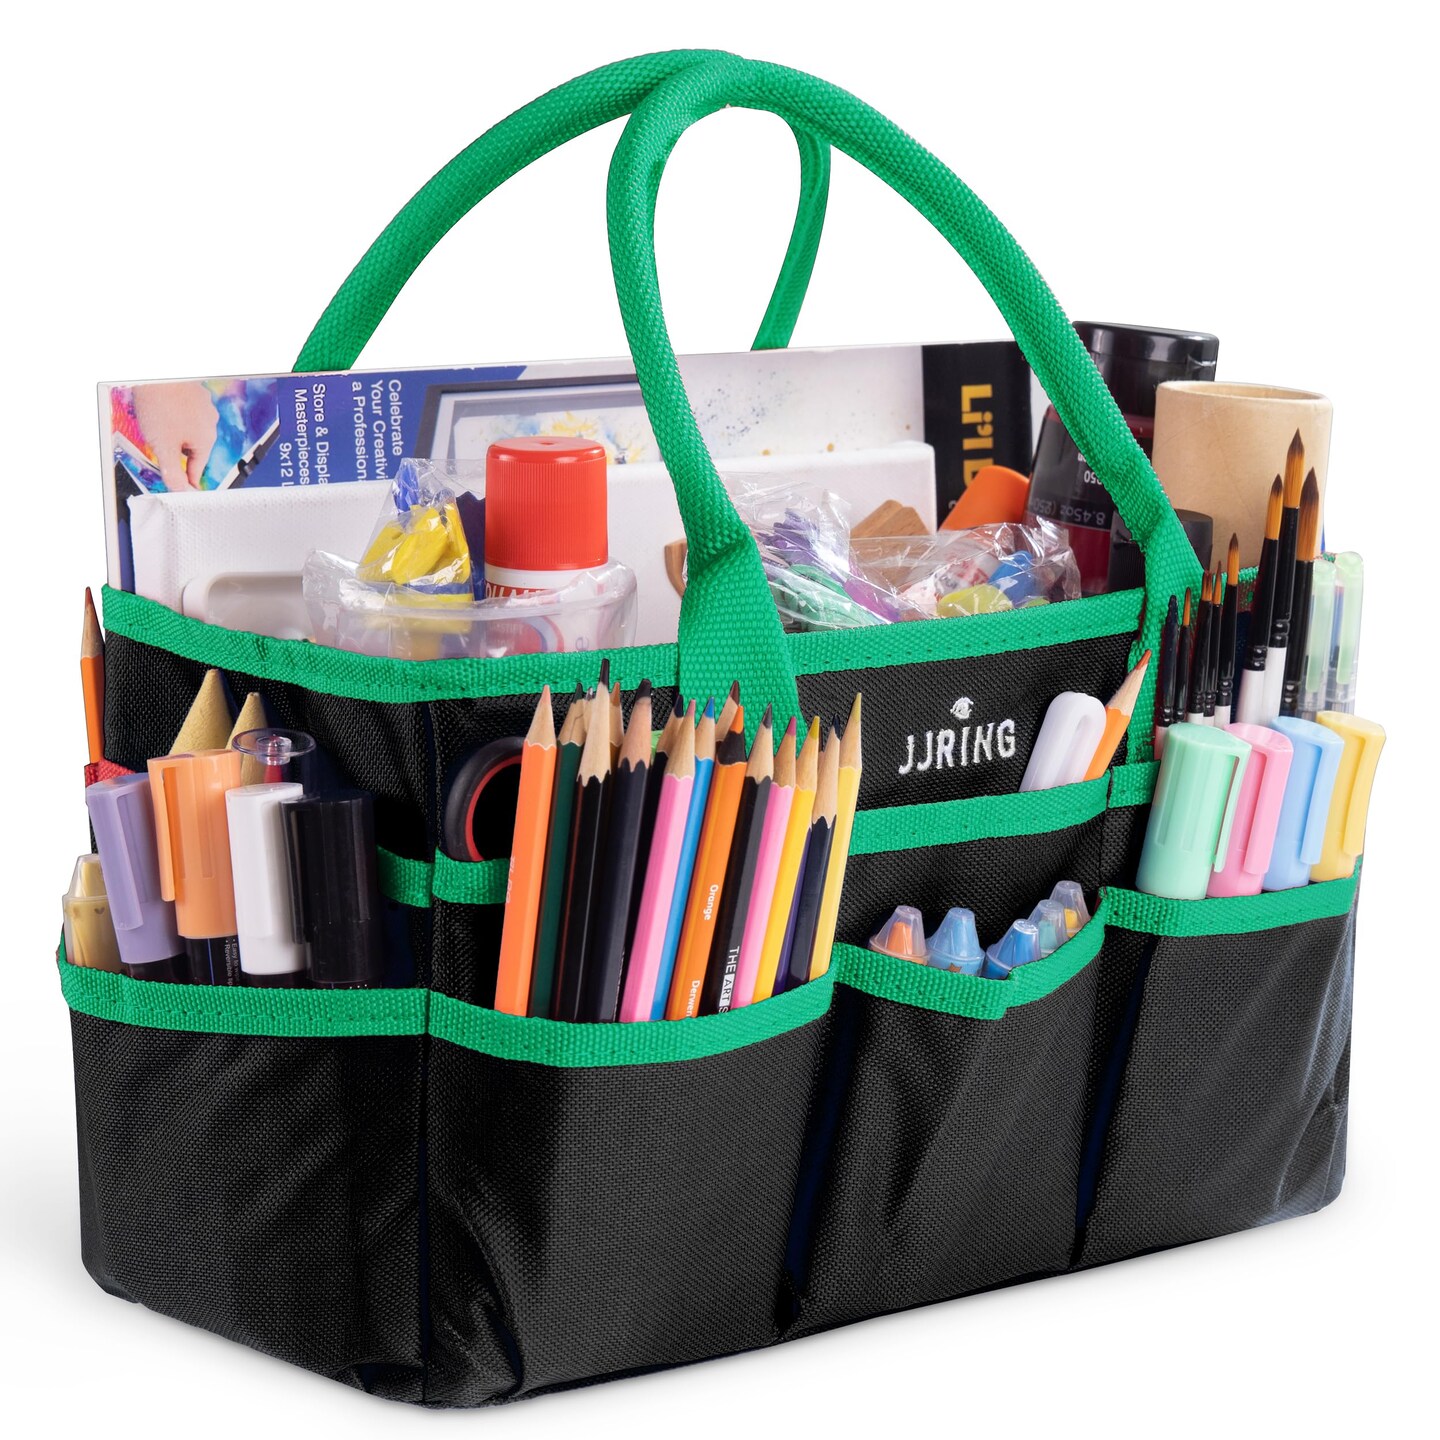 JJRING Craft and Art Organizer Tote Bag - 600D Green Nylon Fabric Art Caddy with Pockets - for Art, Craft, Sewing, Medical, and Office Supplies Storage